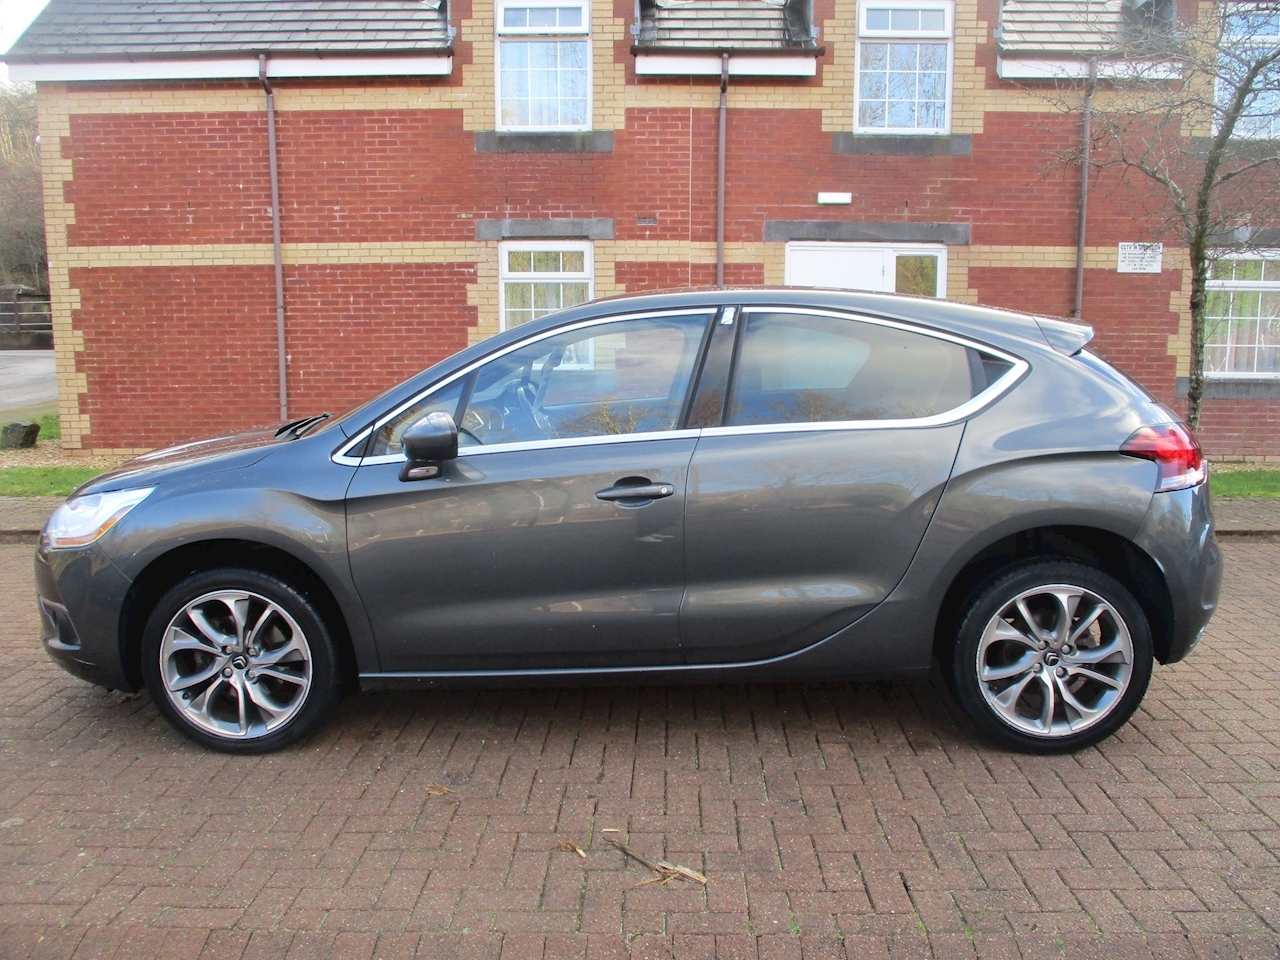 Ds4 Hdi Dstyle 2.0 5dr Hatchback Manual Diesel